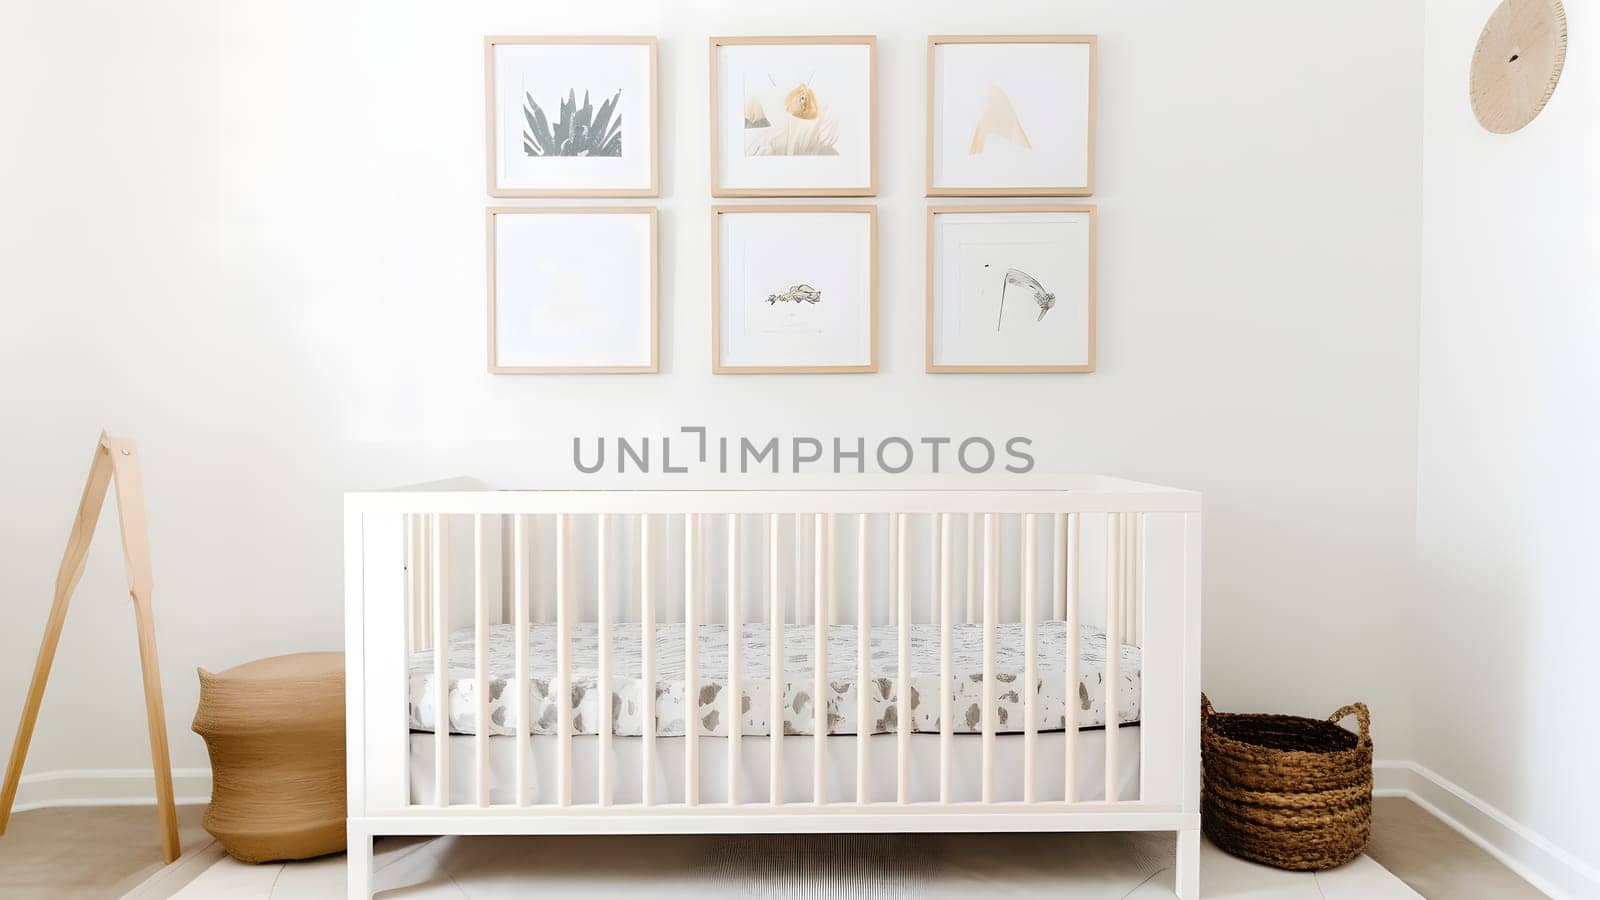 Bright white minimalist nursery wall with frames above cradle, neural network generated image by z1b